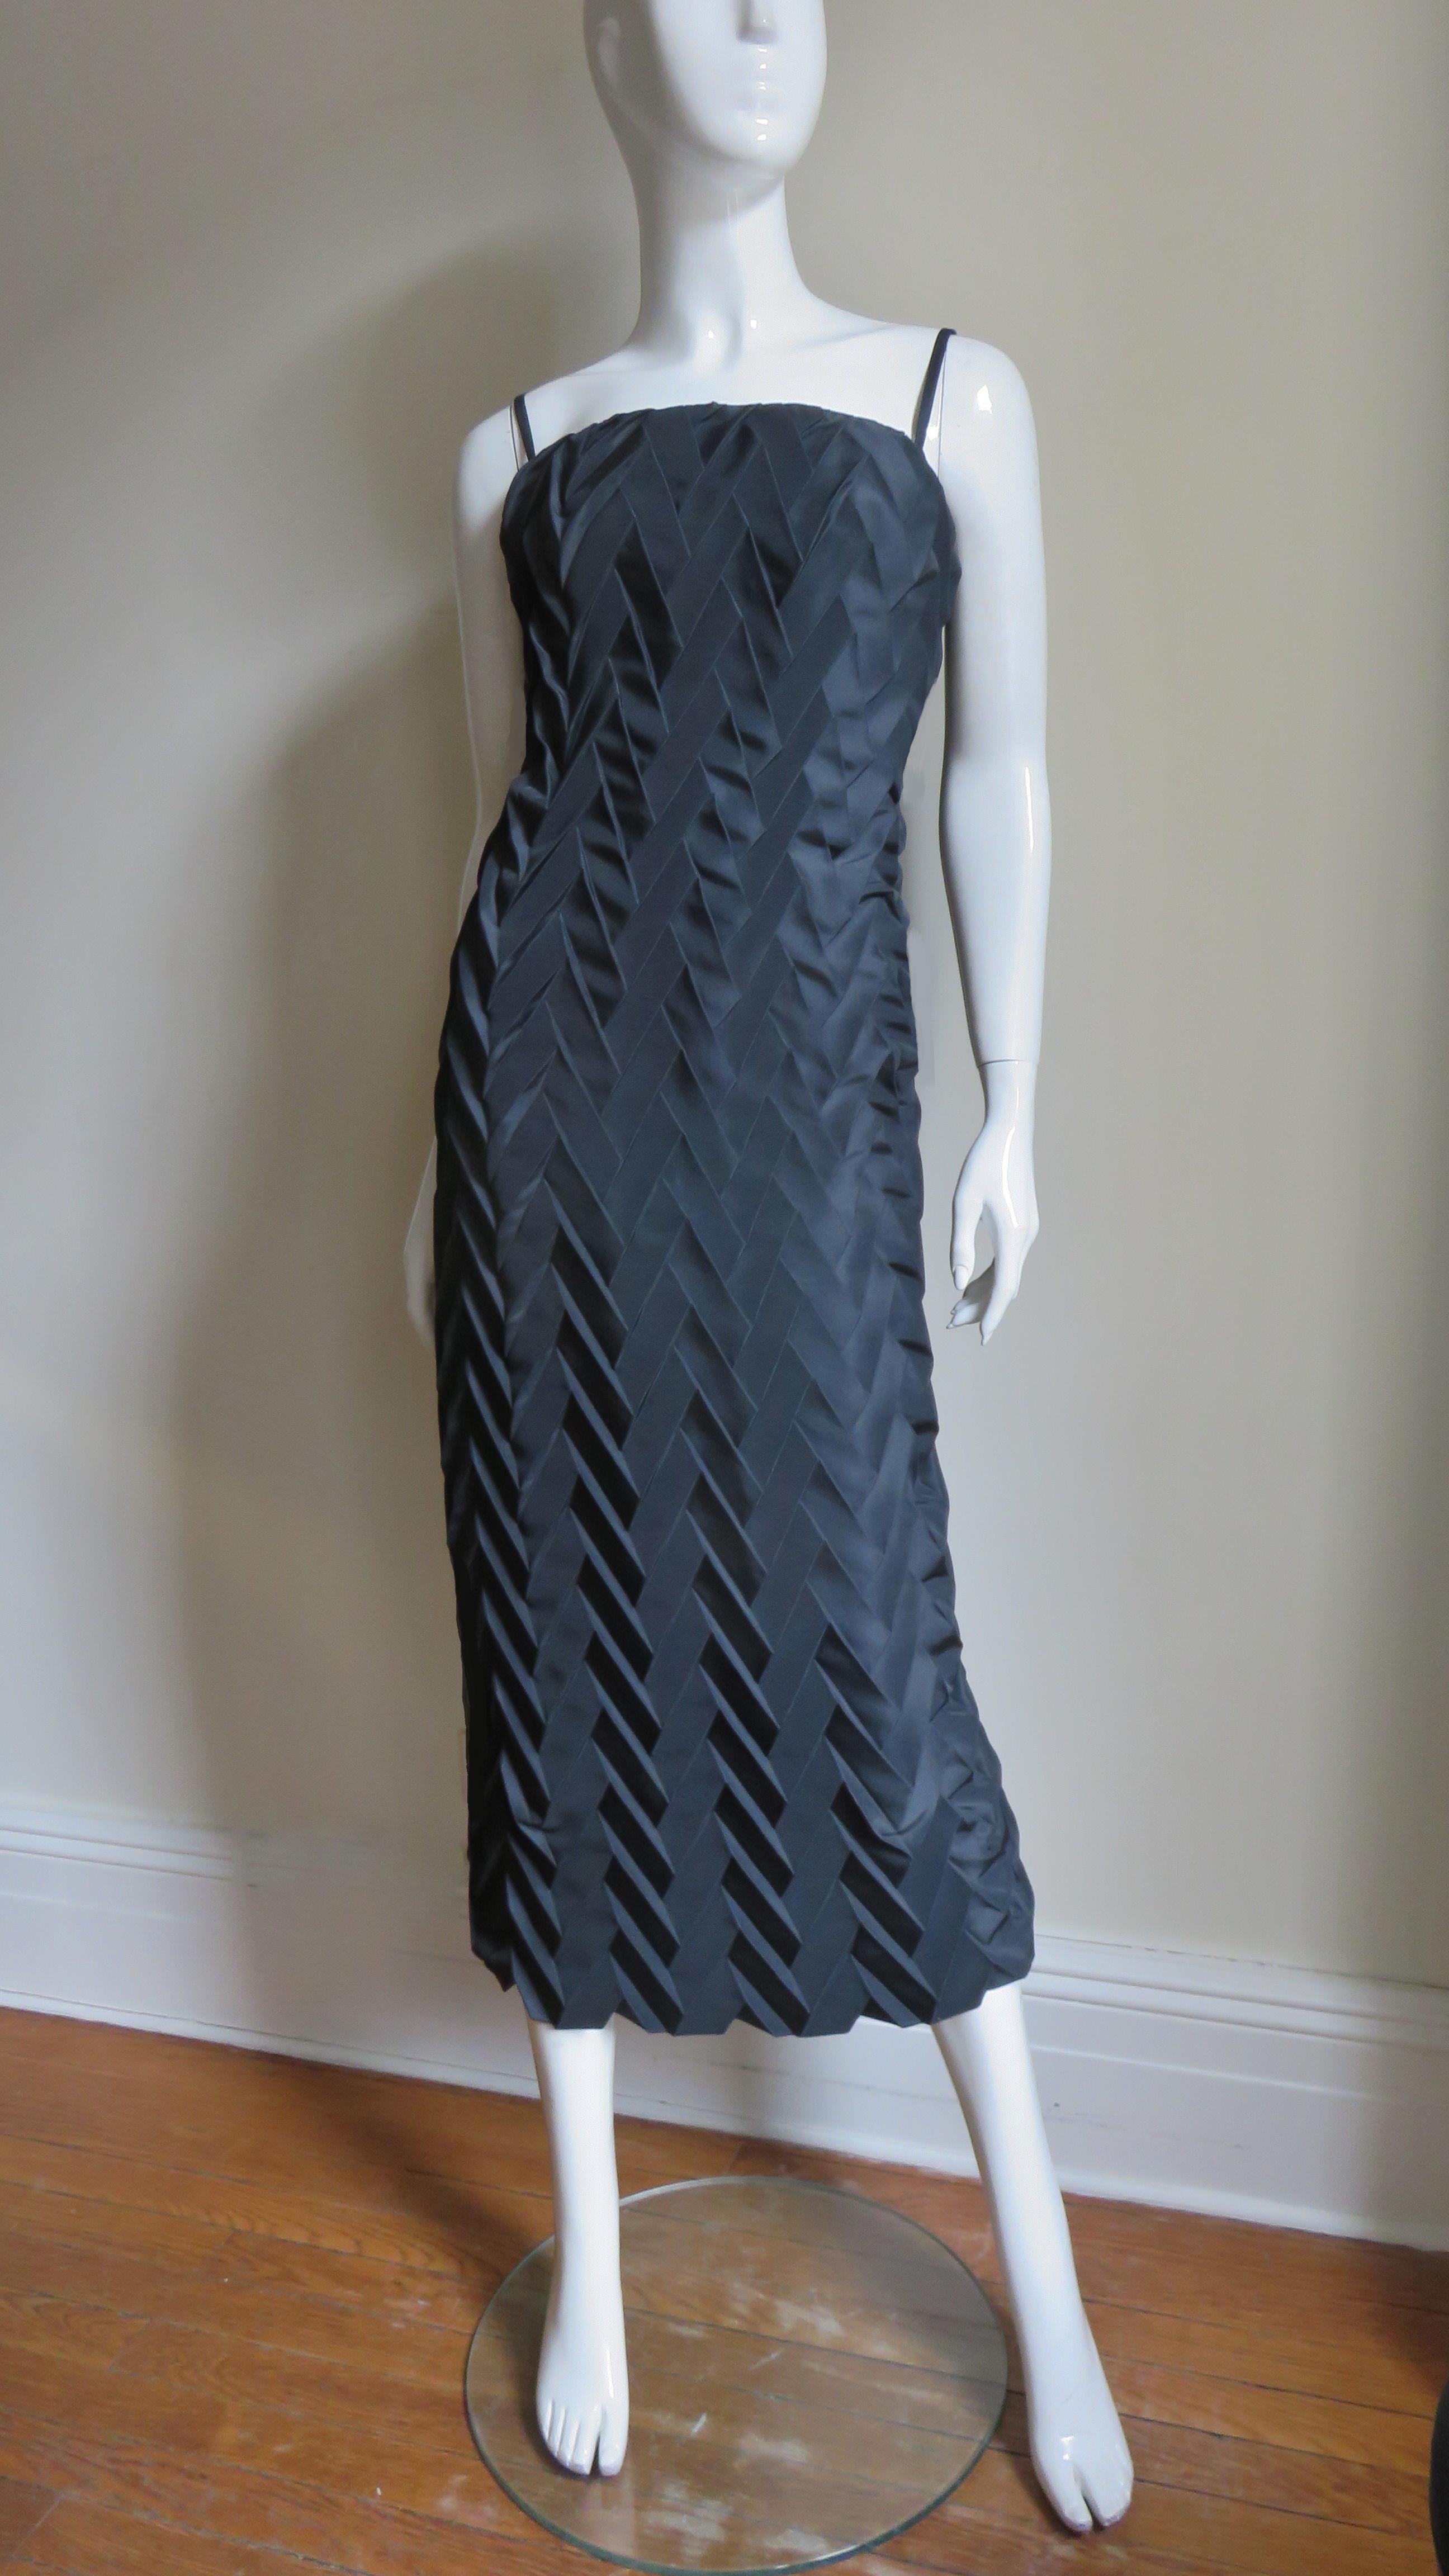 A fabulous black silk dress from Hanae Mori.  It is simply cut with spaghetti straps and an intricately pleated chevron body.  It has an invisible side zipper and is silk lined. 
Fits sizes Small, Medium. Marked French size 42.

Bust  34-36